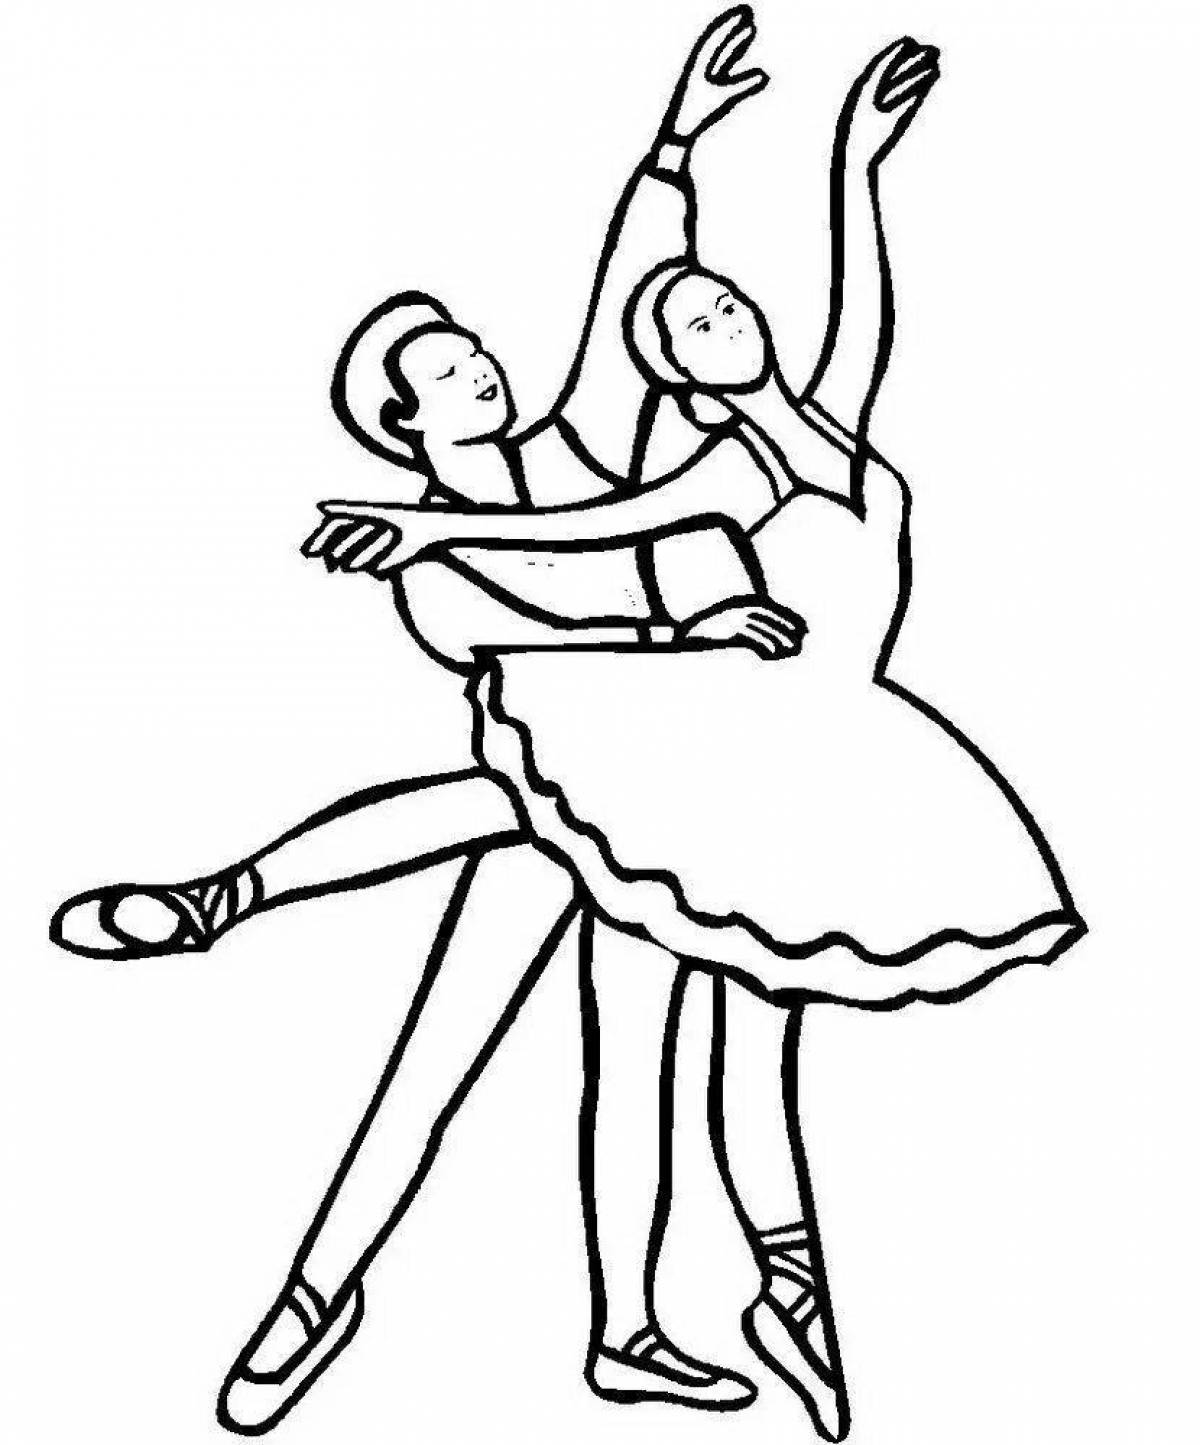 Coloring page cheerful dancer